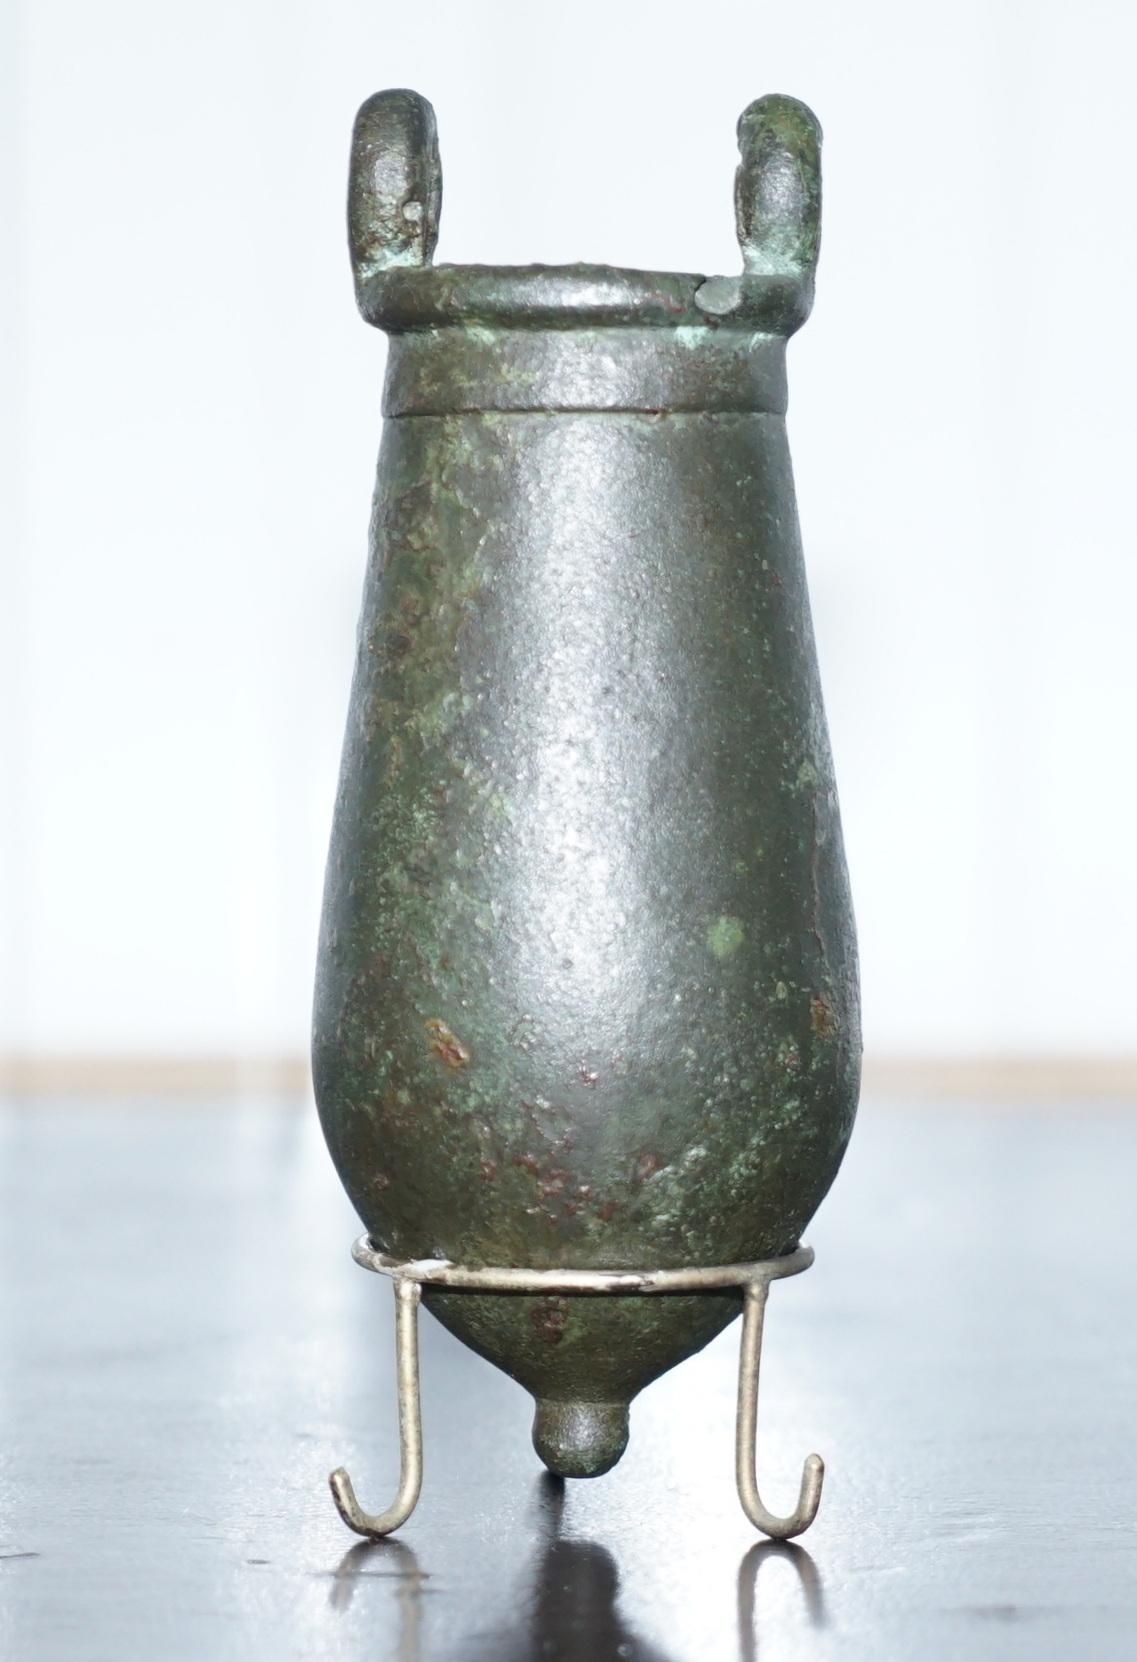 Wimbledon-Furniture

Wimbledon-Furniture is delighted to offer for sale this very rare 1st century 100ac Roman Amphora Bronze vessel

There are multiple high definition super-sized pictures at the bottom of this page

An exquisite and